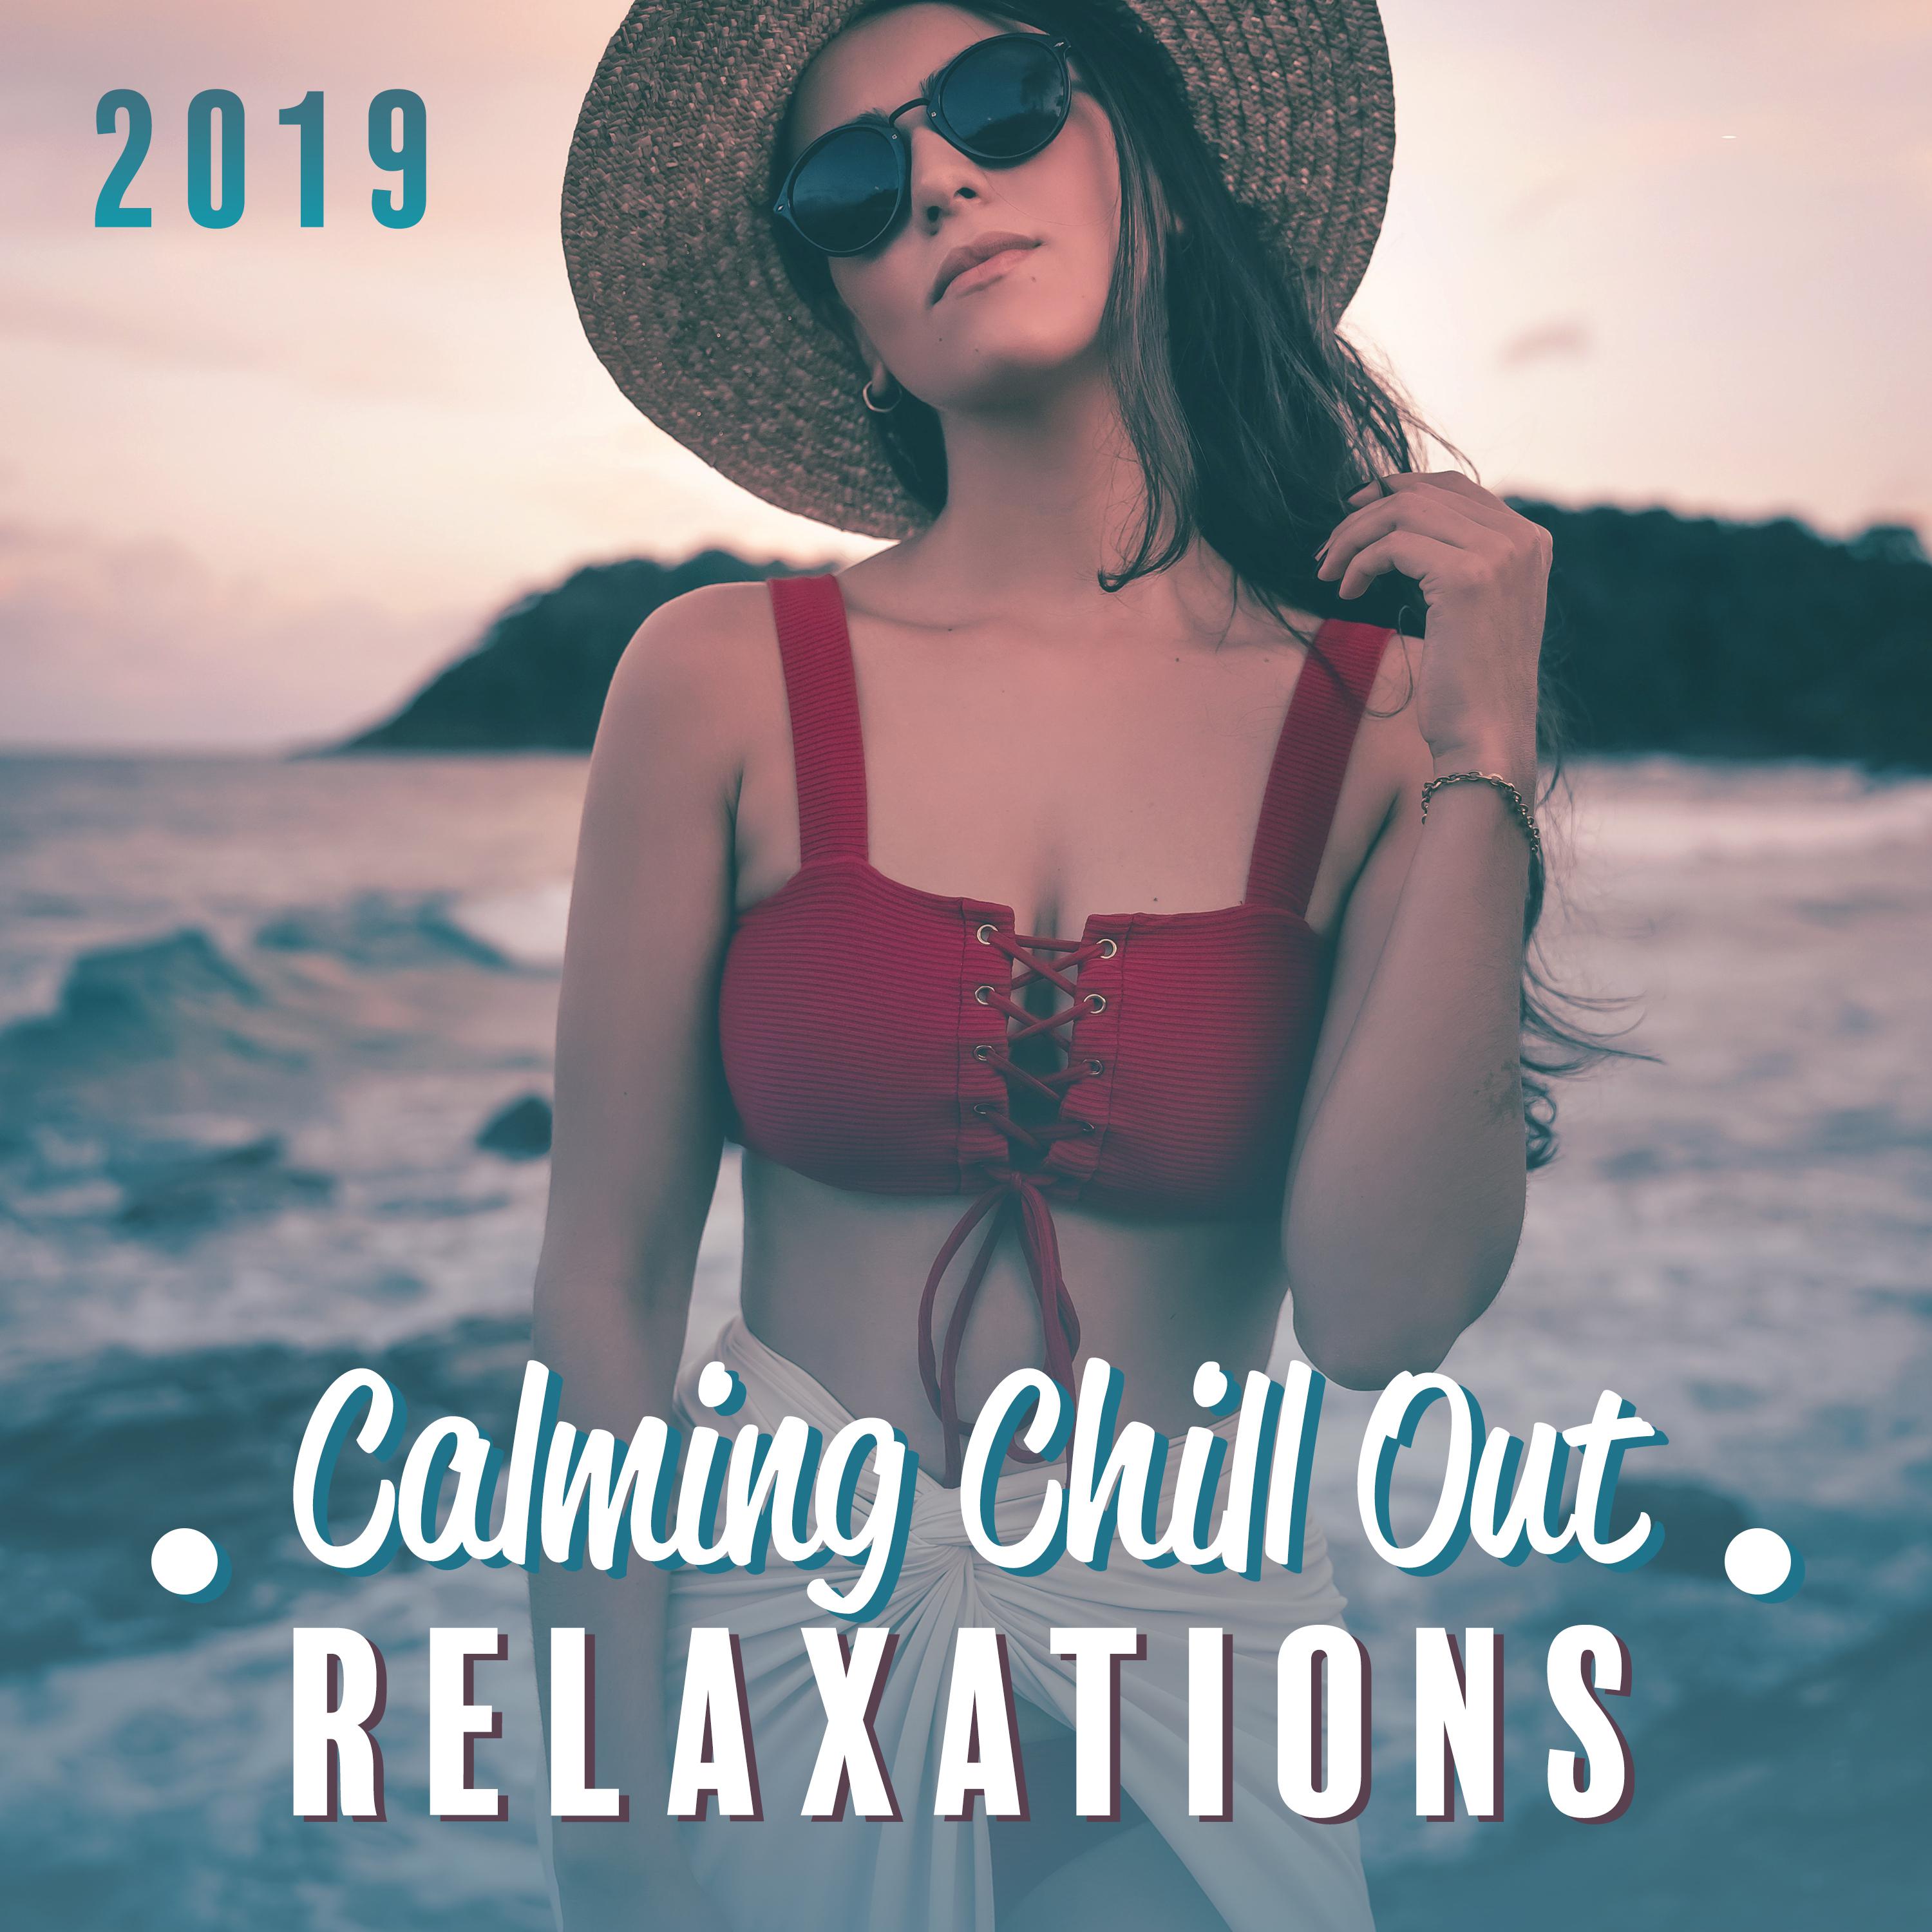 2019 Calming Chill Out Relaxations  Ambient Music for Relax  Rest, Summer Chill Out, Music Therapy, Ibiza Lounge, Zen, Beach Music